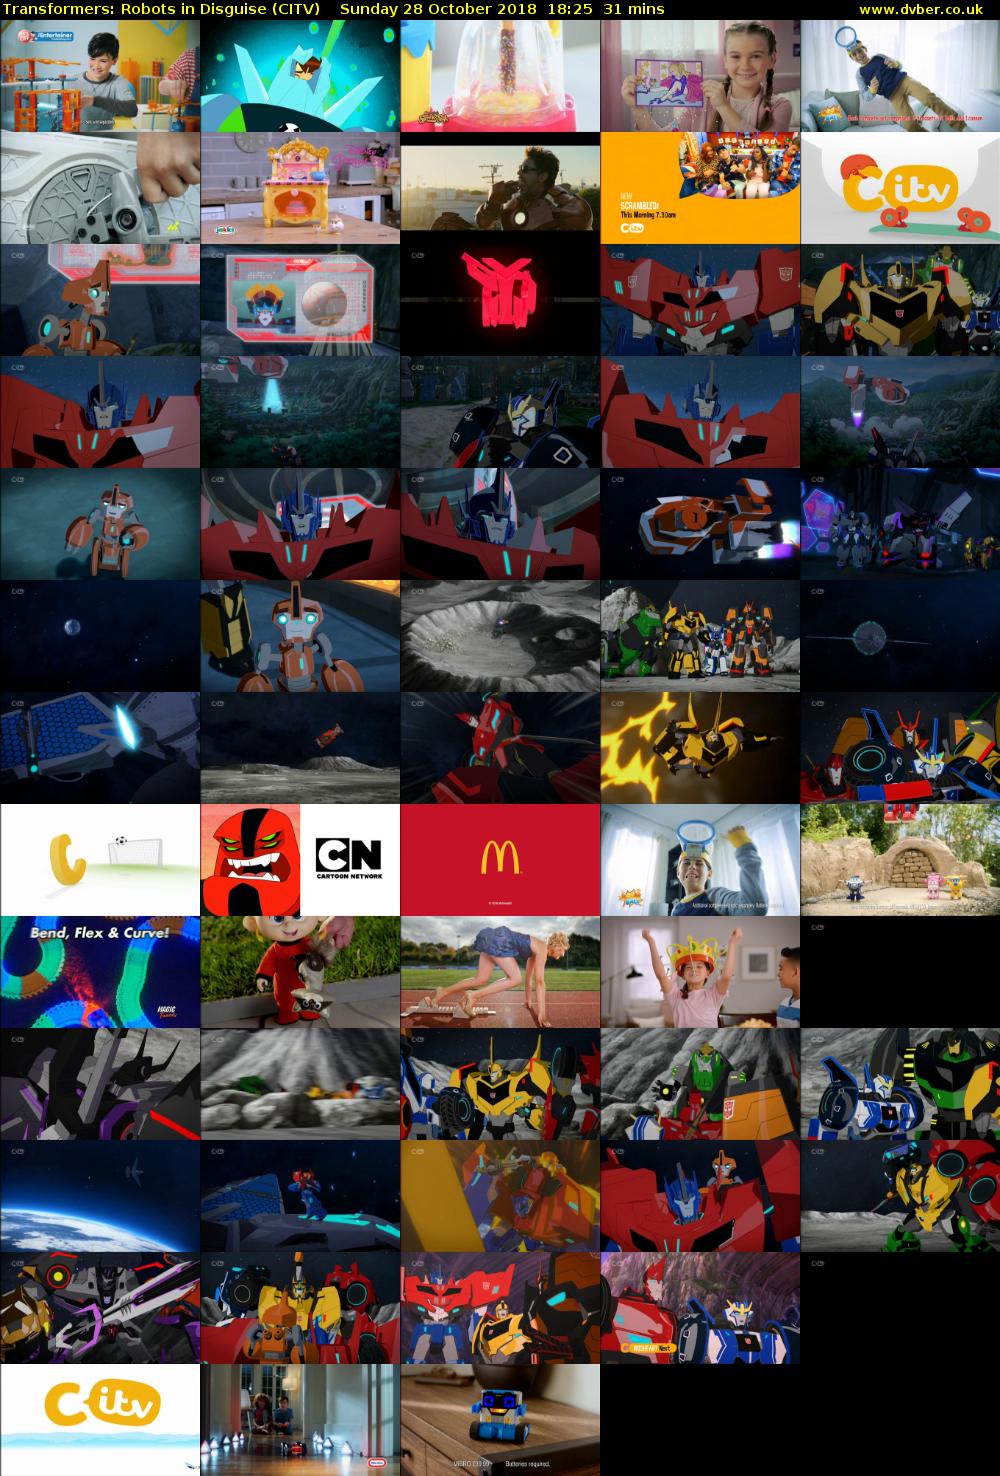 Transformers: Robots in Disguise (CITV) Sunday 28 October 2018 18:25 - 18:56